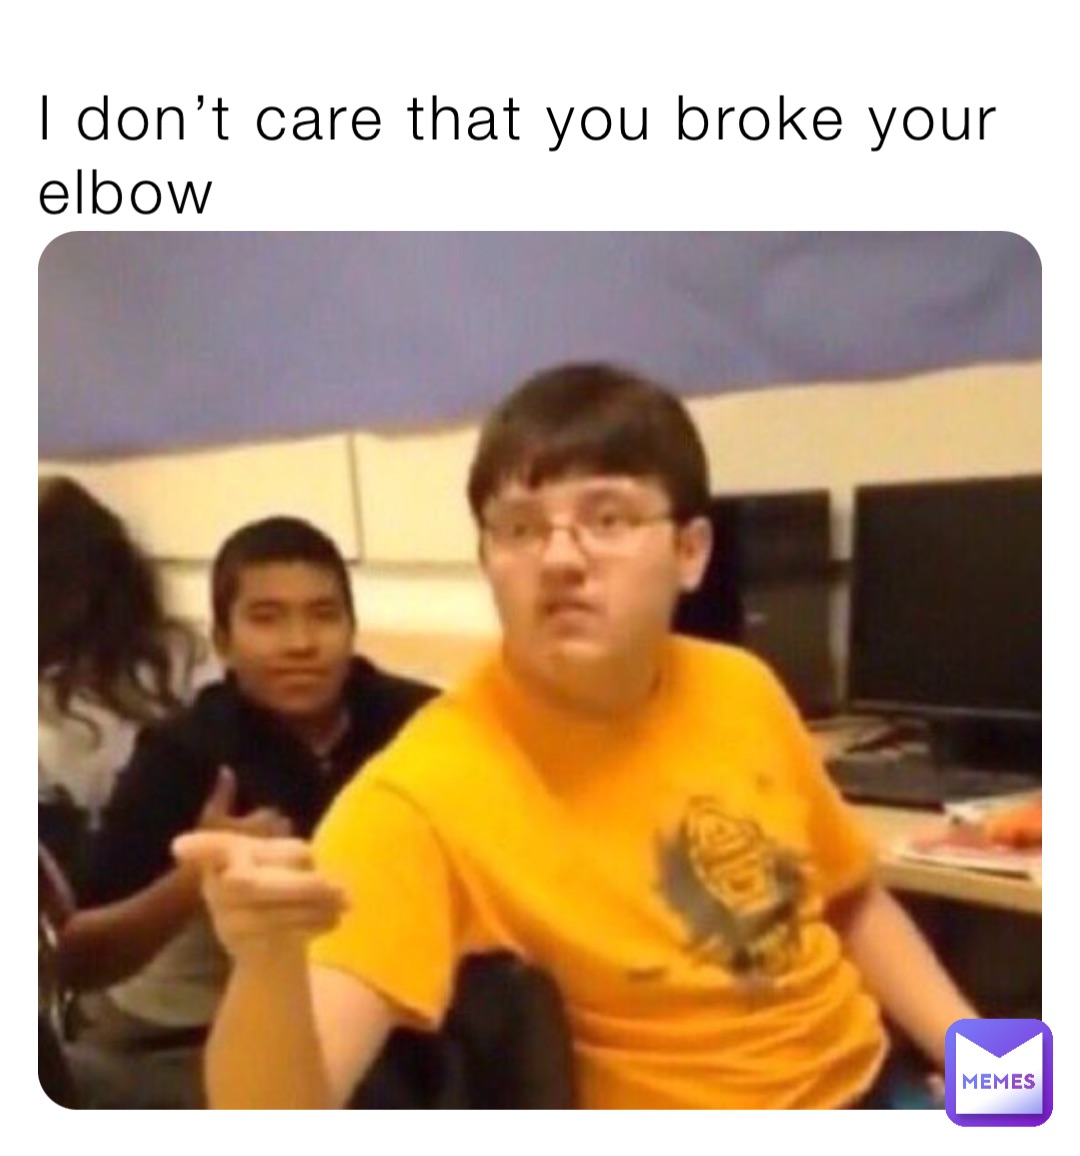 I don’t care that you broke your elbow